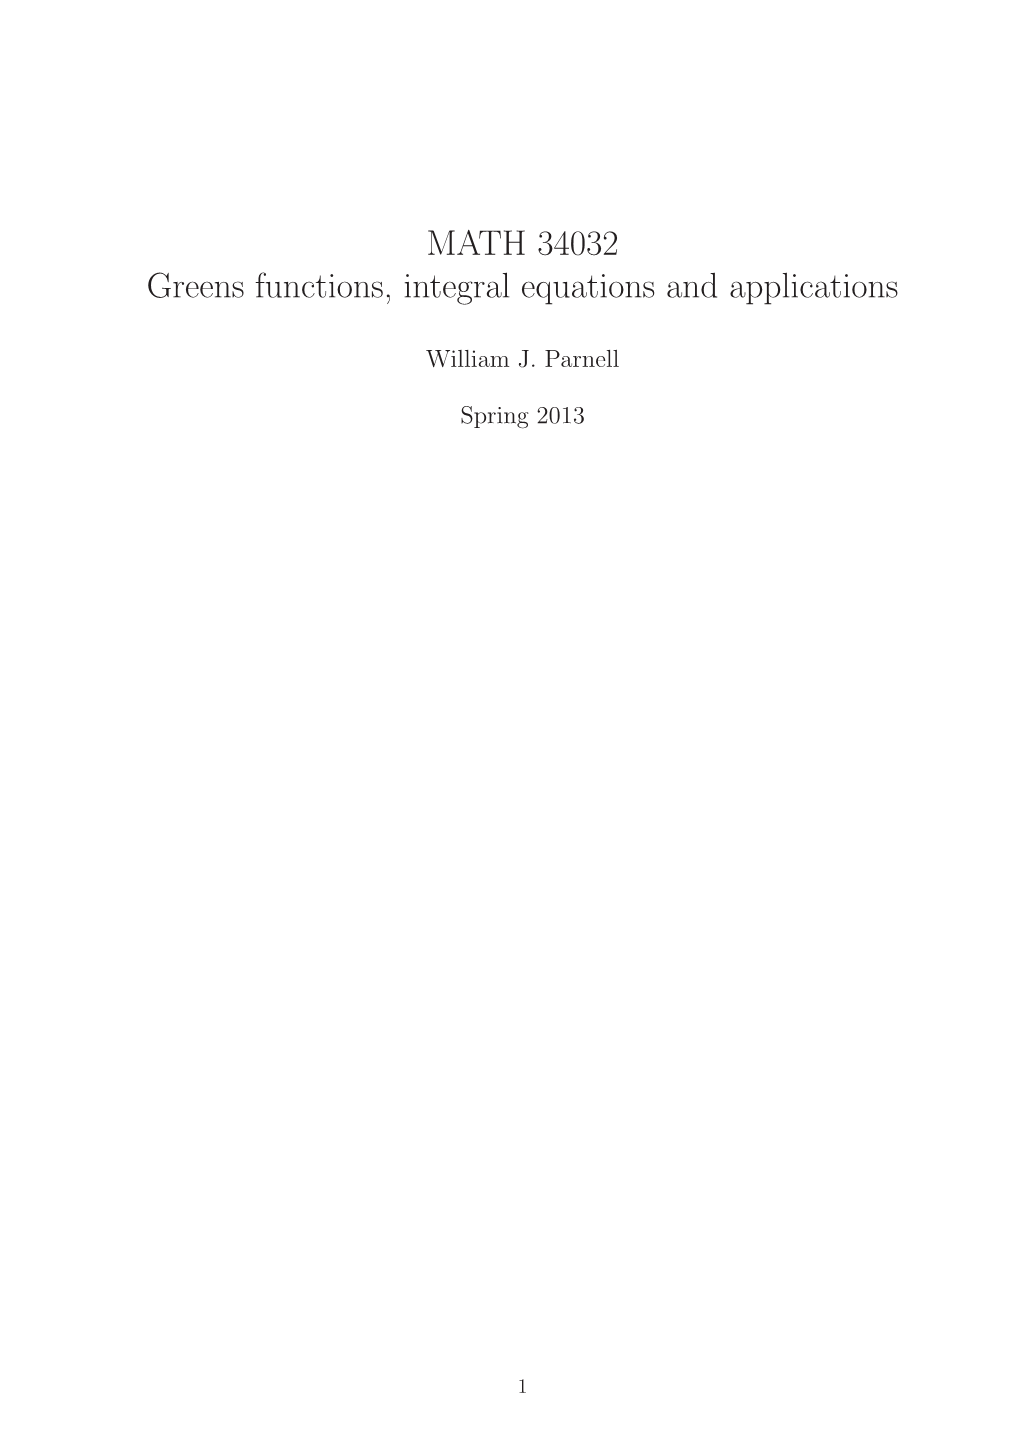 MATH 34032 Greens Functions, Integral Equations and Applications